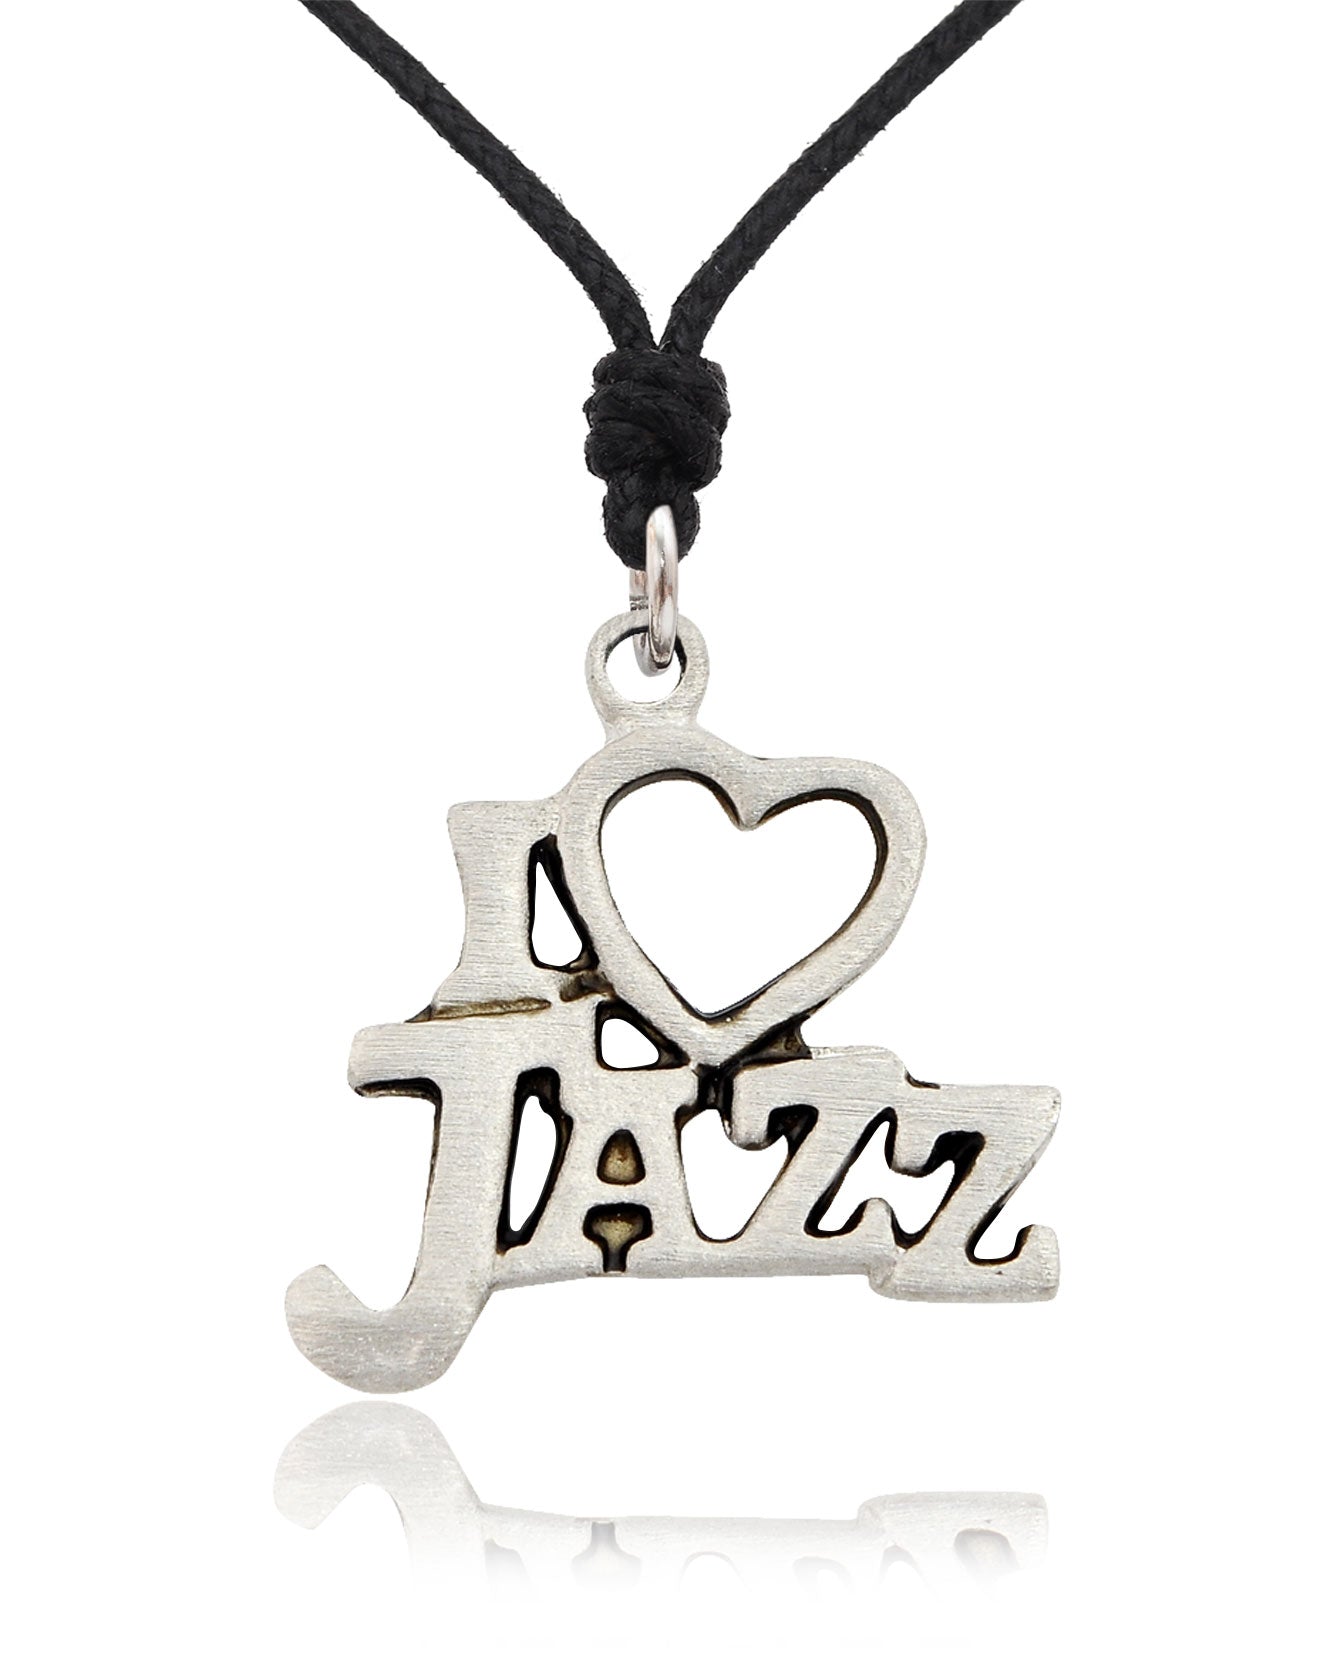 I Love Jazz Music Silver Pewter Charm Necklace Pendant Jewelry